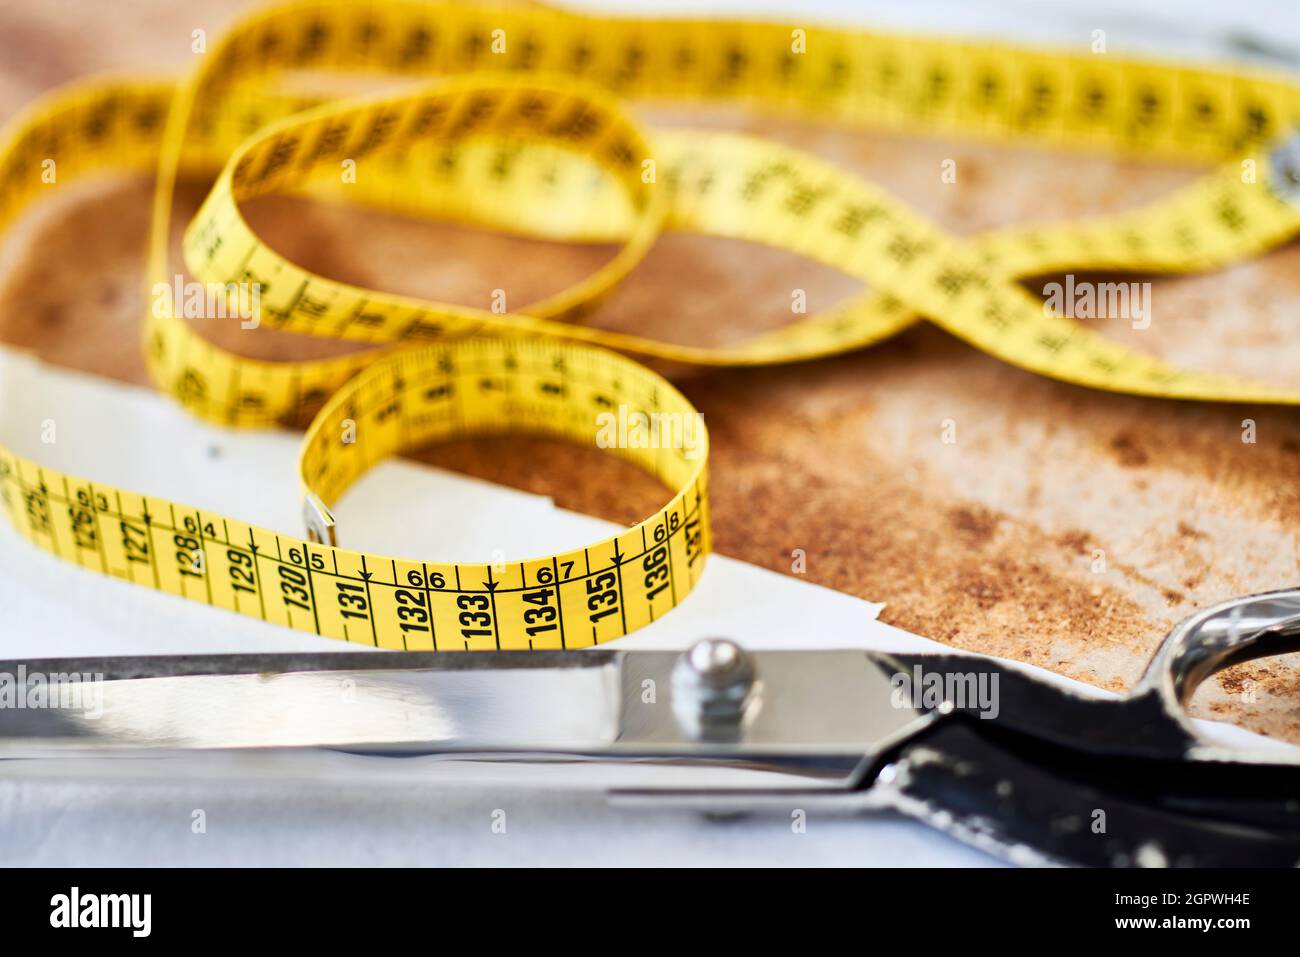 Tape Measure Used by Dressmakers and Tailors Stock Image - Image of white,  yellow: 182649663